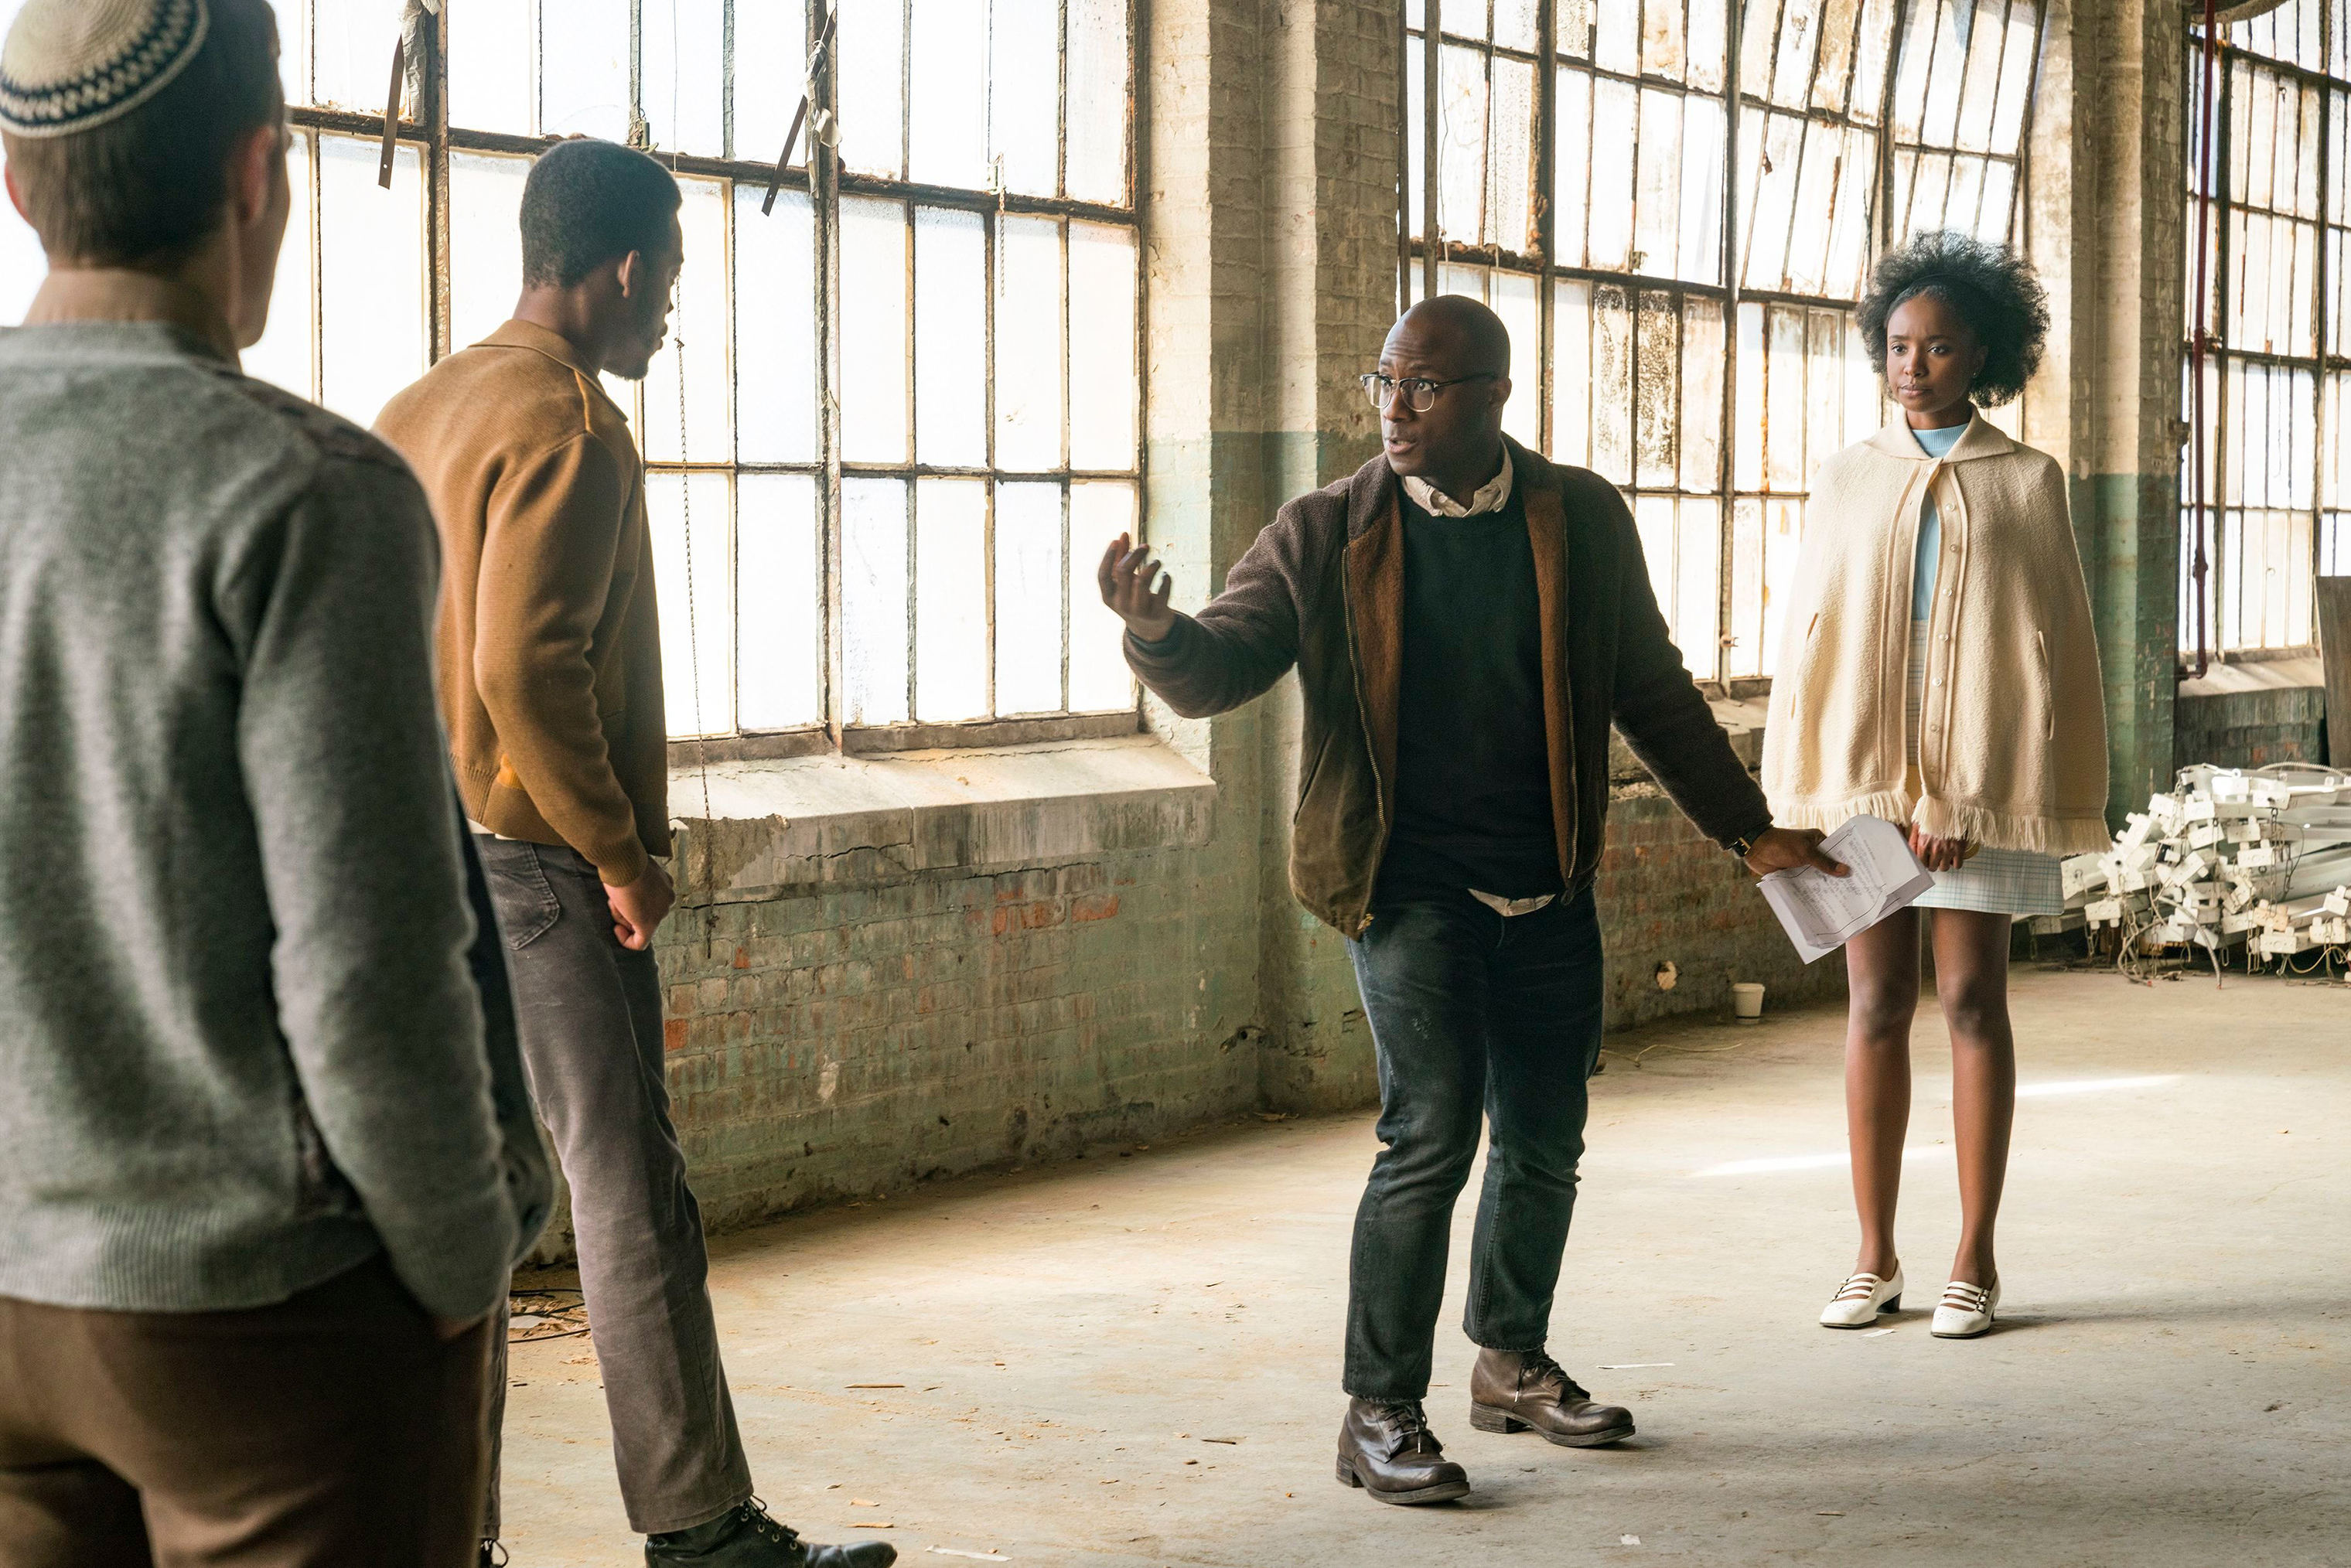 Director Barry Jenkins, center, works with actors Stephan James, left, and KiKi Layne on the set of <i>If Beale Street Could Talk</i> (Tatum Mangus—Annapurna Picture/Shutterstock)